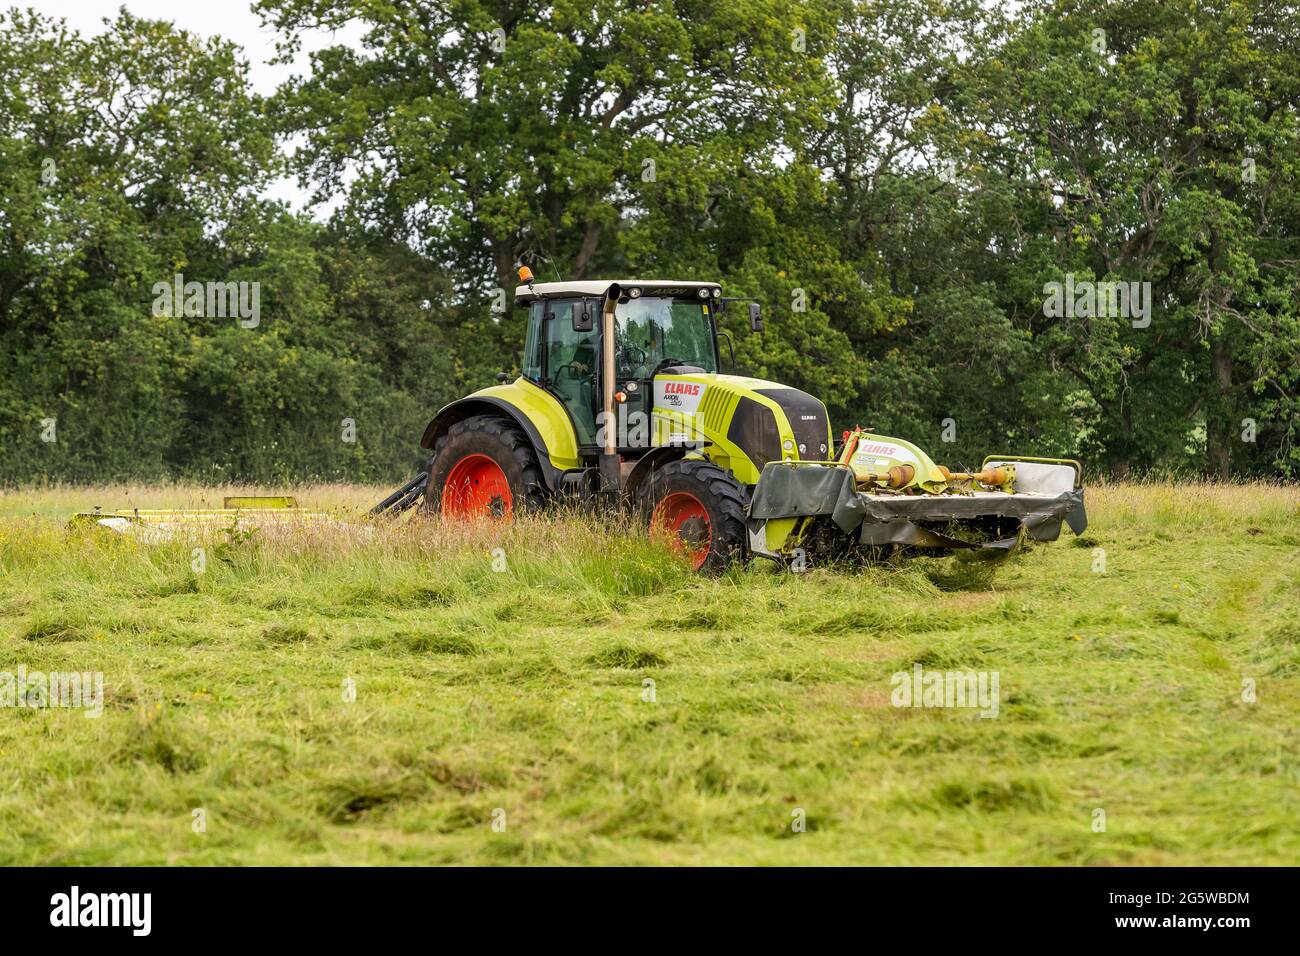 Summer grass cutting, Forest of Dean. CLAAS 820 Axion tractor and cutters. Stock Photo